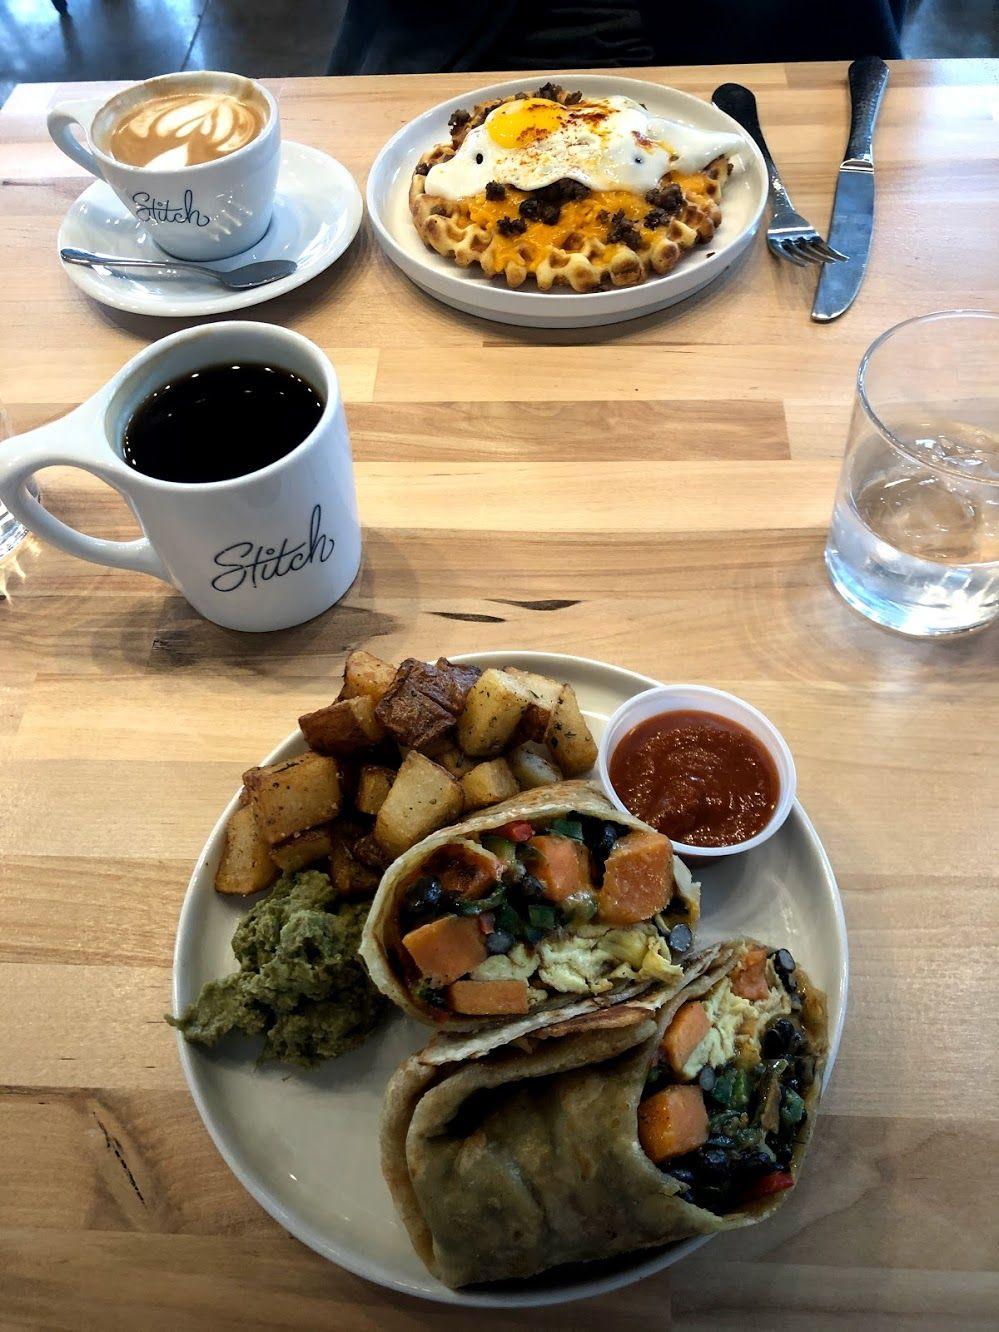 A burrito with sweet potatoes, eggs and greens. There are potatoes next to it on the plate.